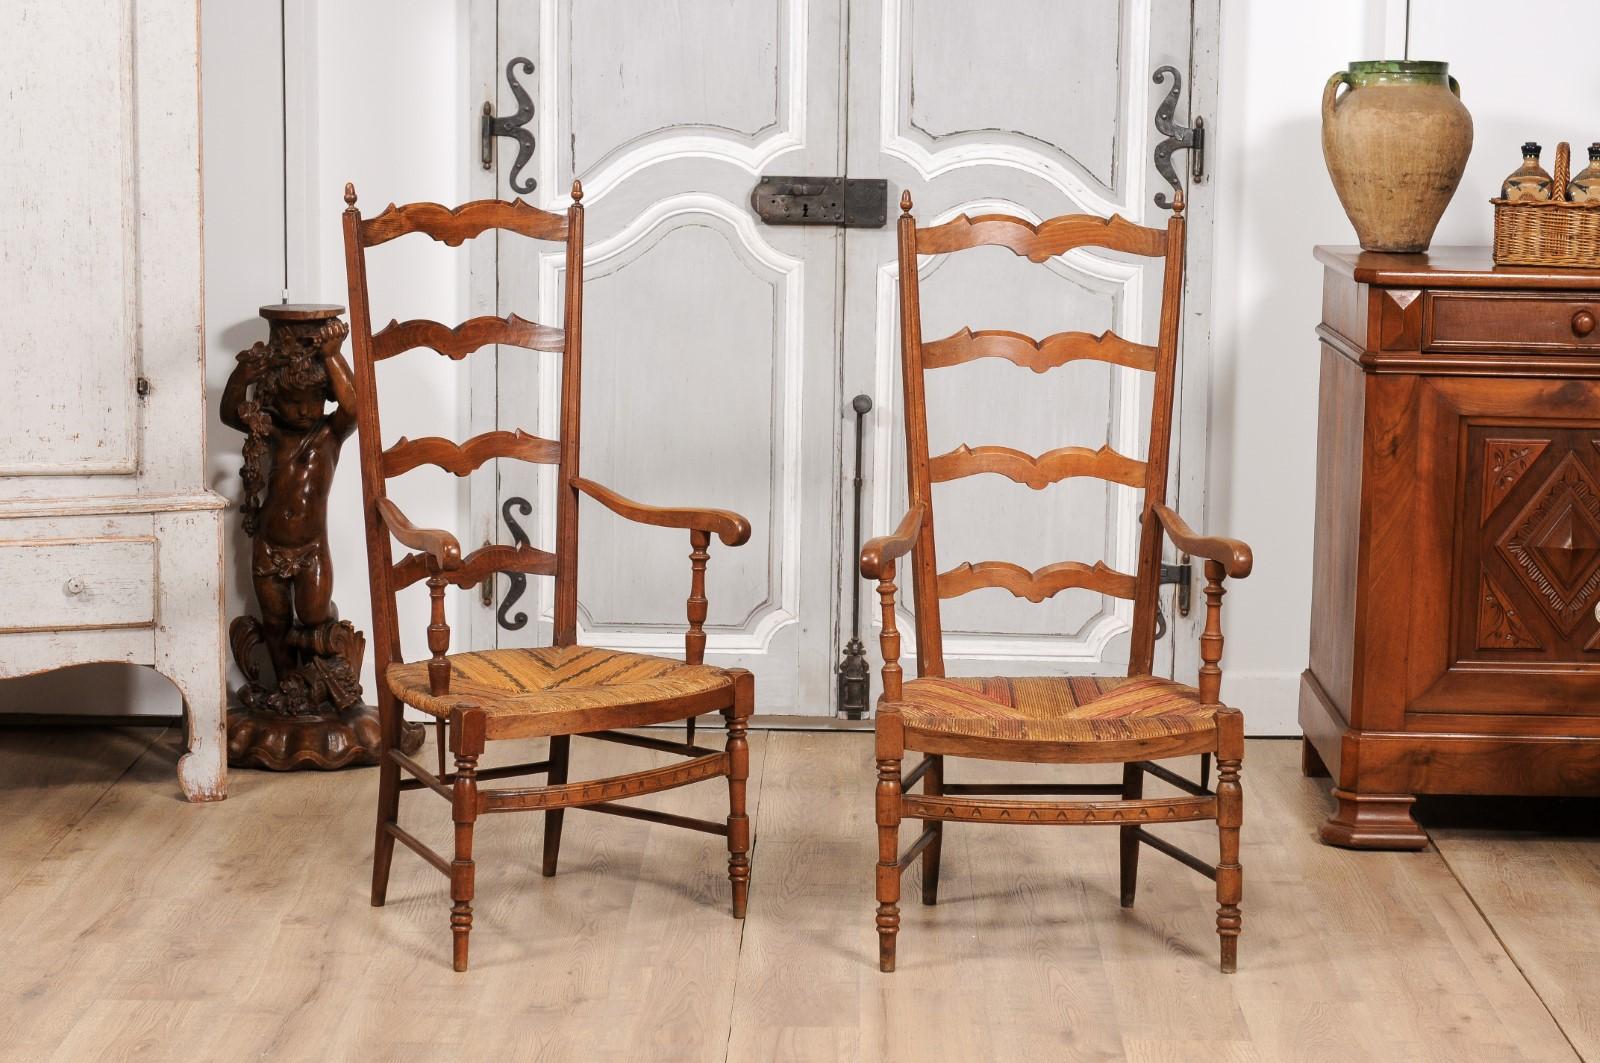 Carved French 1890s Fruitwood Ladder Back Chairs with Straw Seats and Turned Legs For Sale